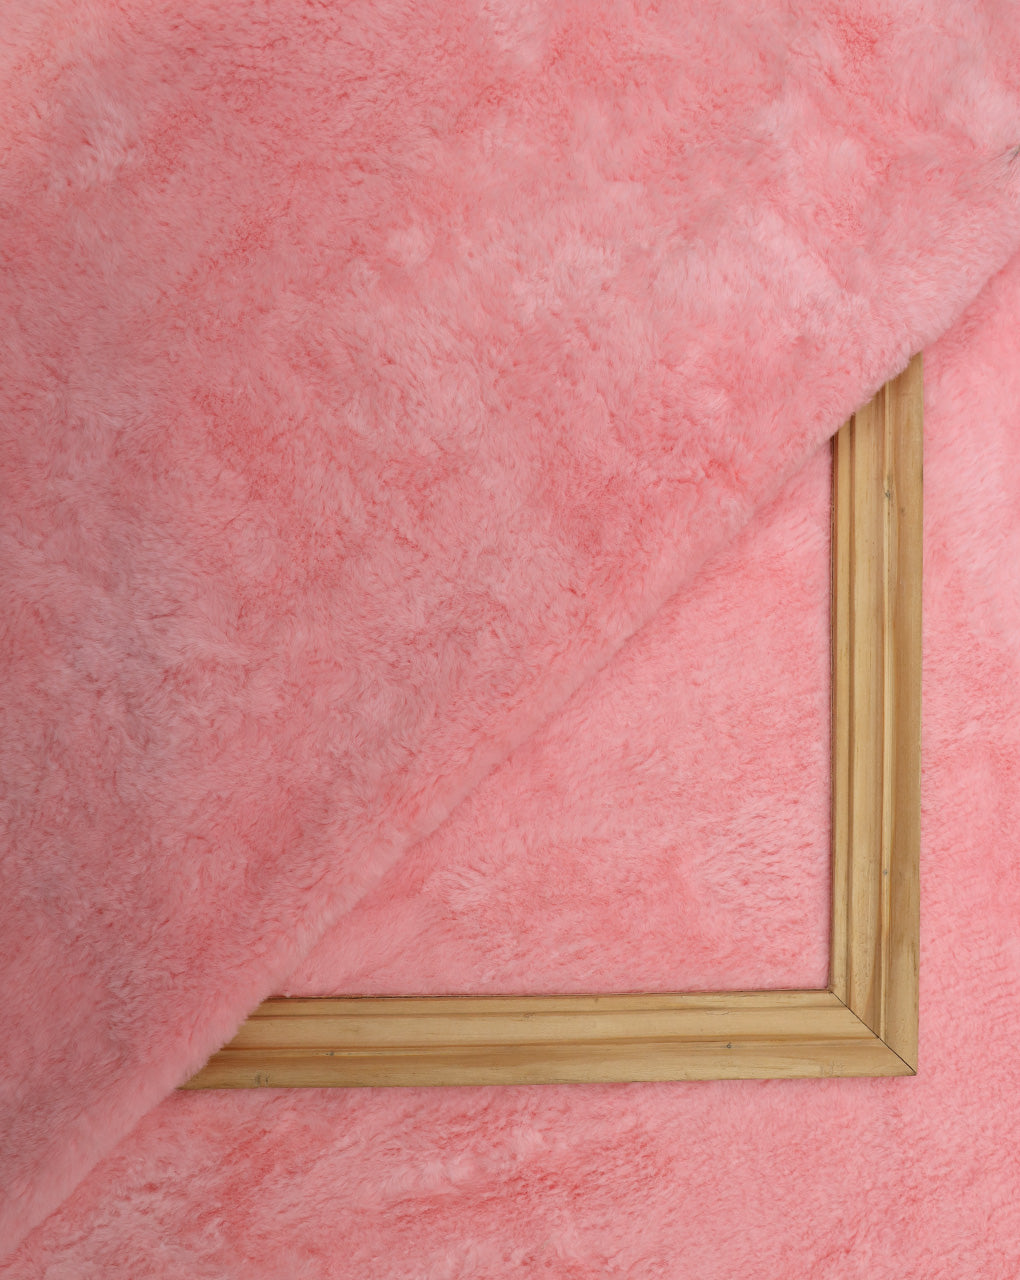 BABY PINK ARTIFICIAL FUR FABRIC